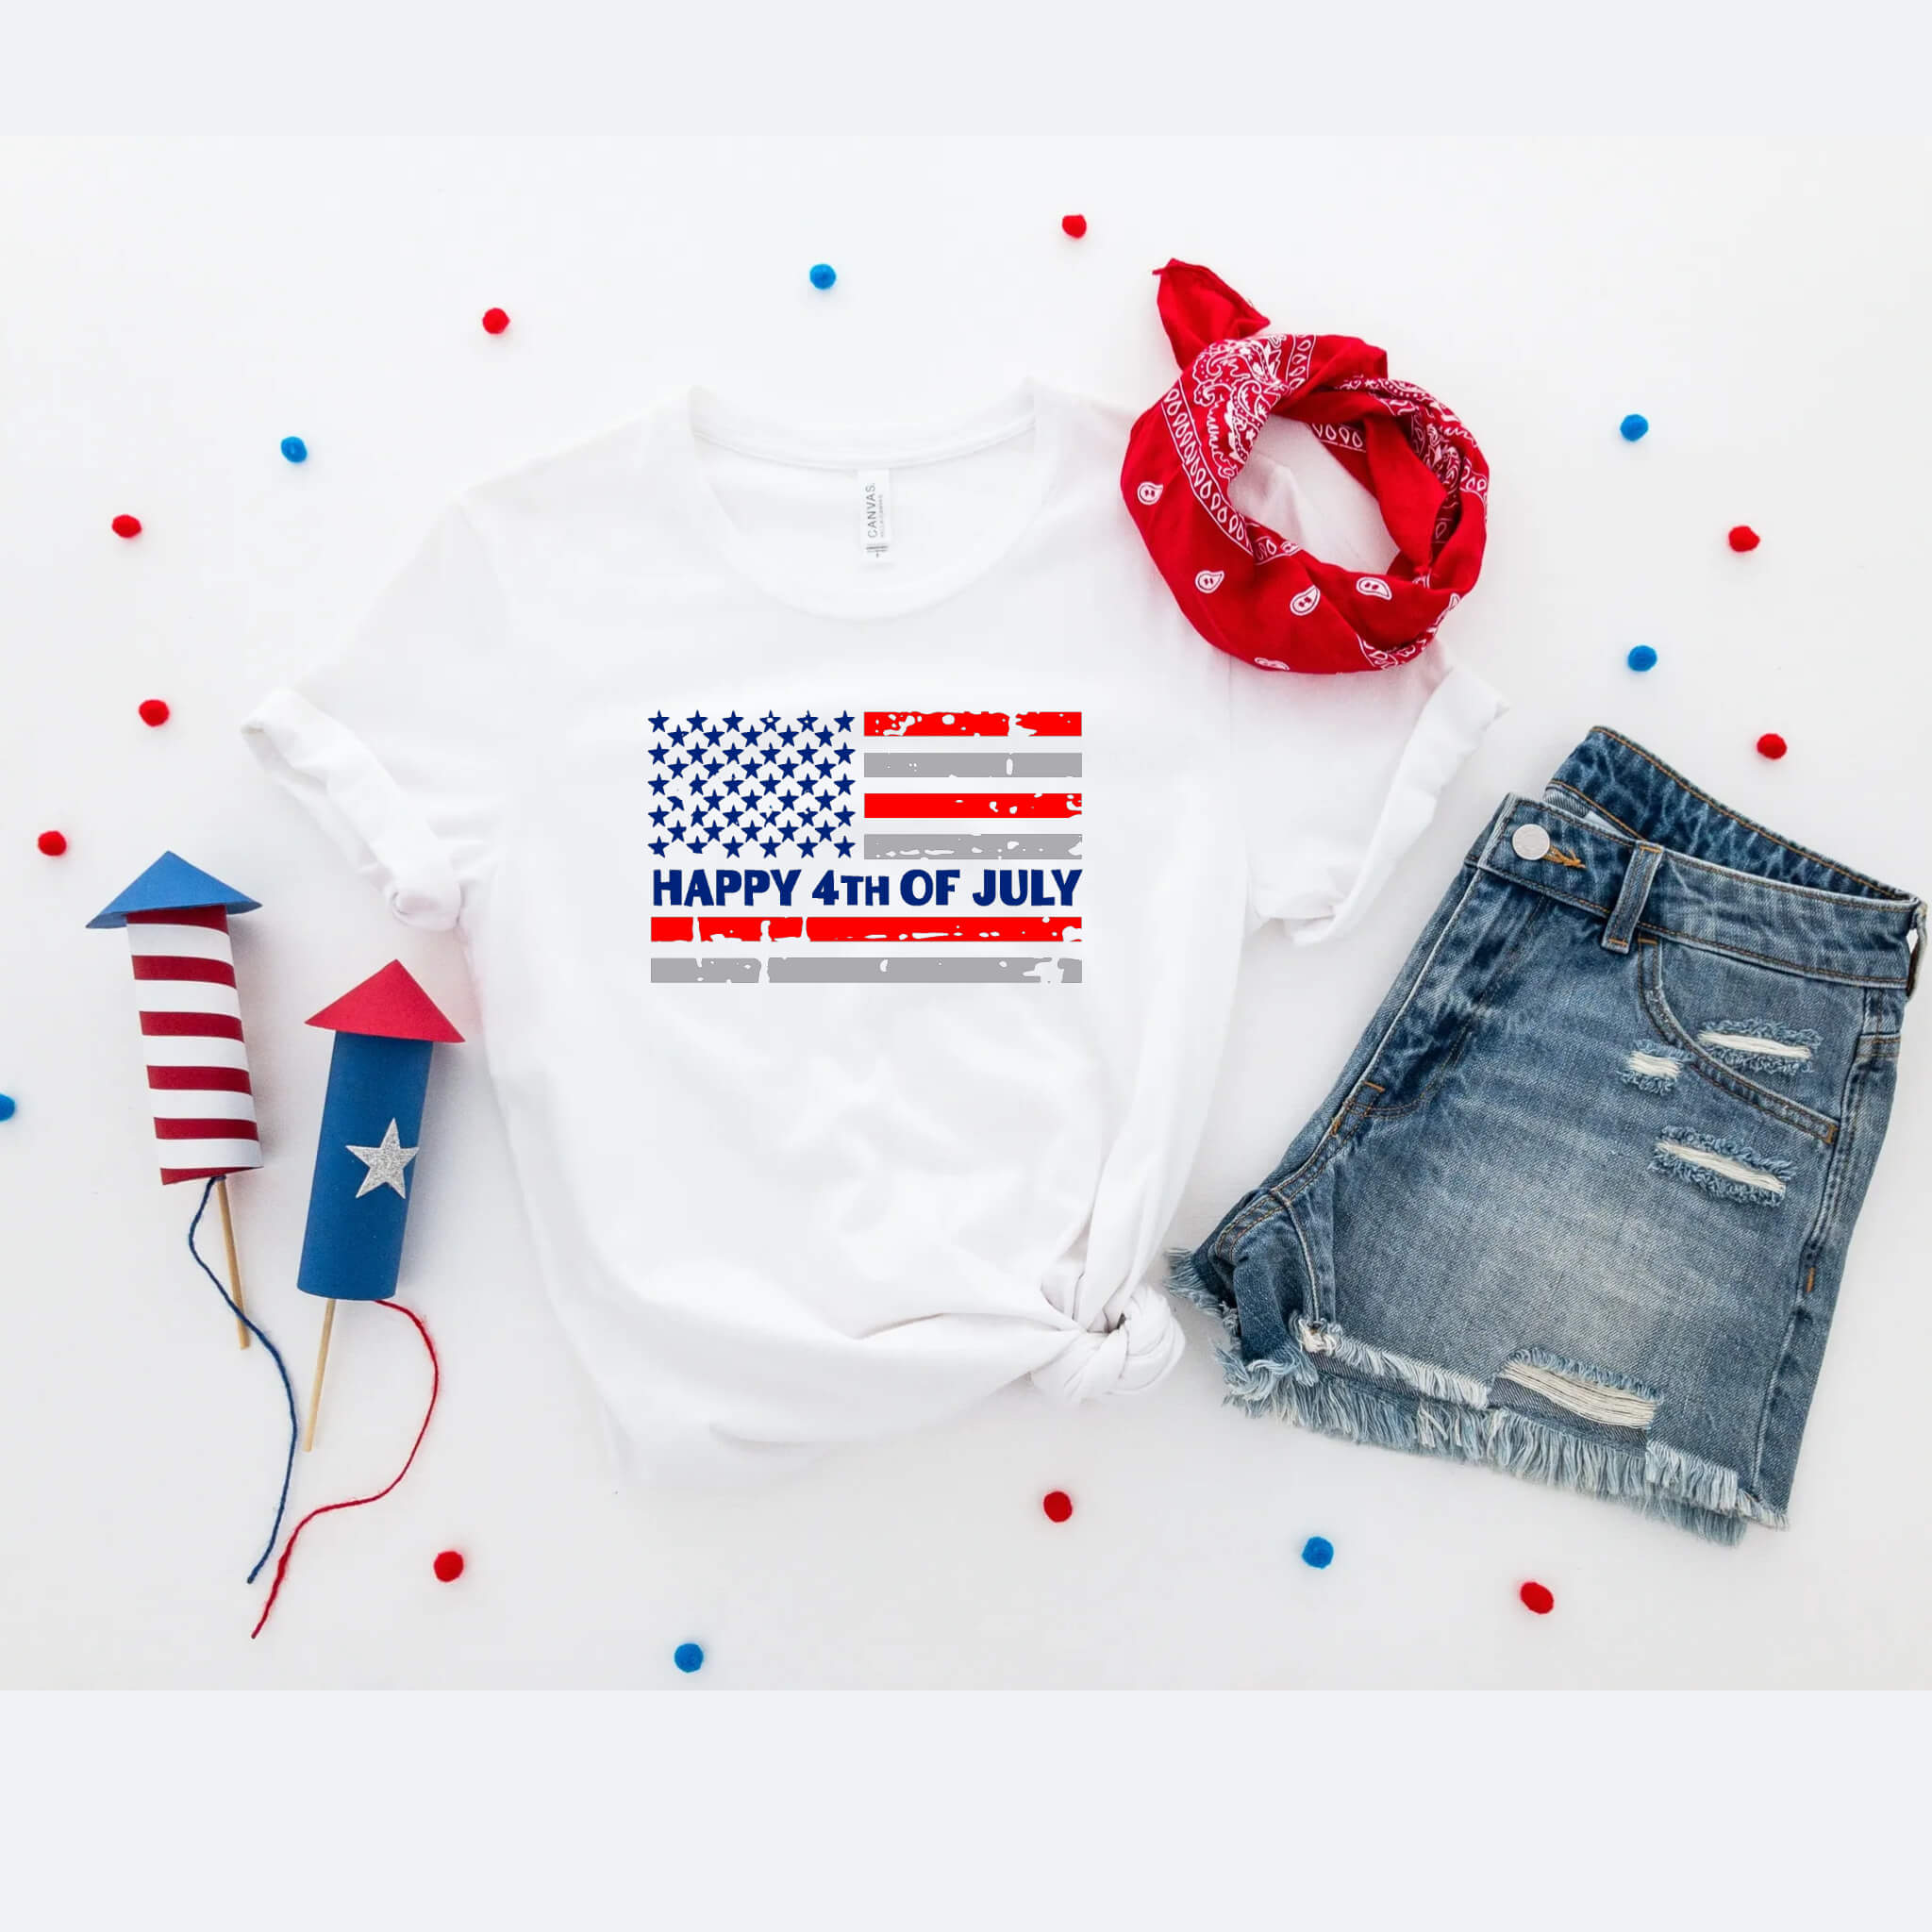 4th of July - Happy 4th of July Patriotic Graphic Print Women’s T-Shirt / Tank Top